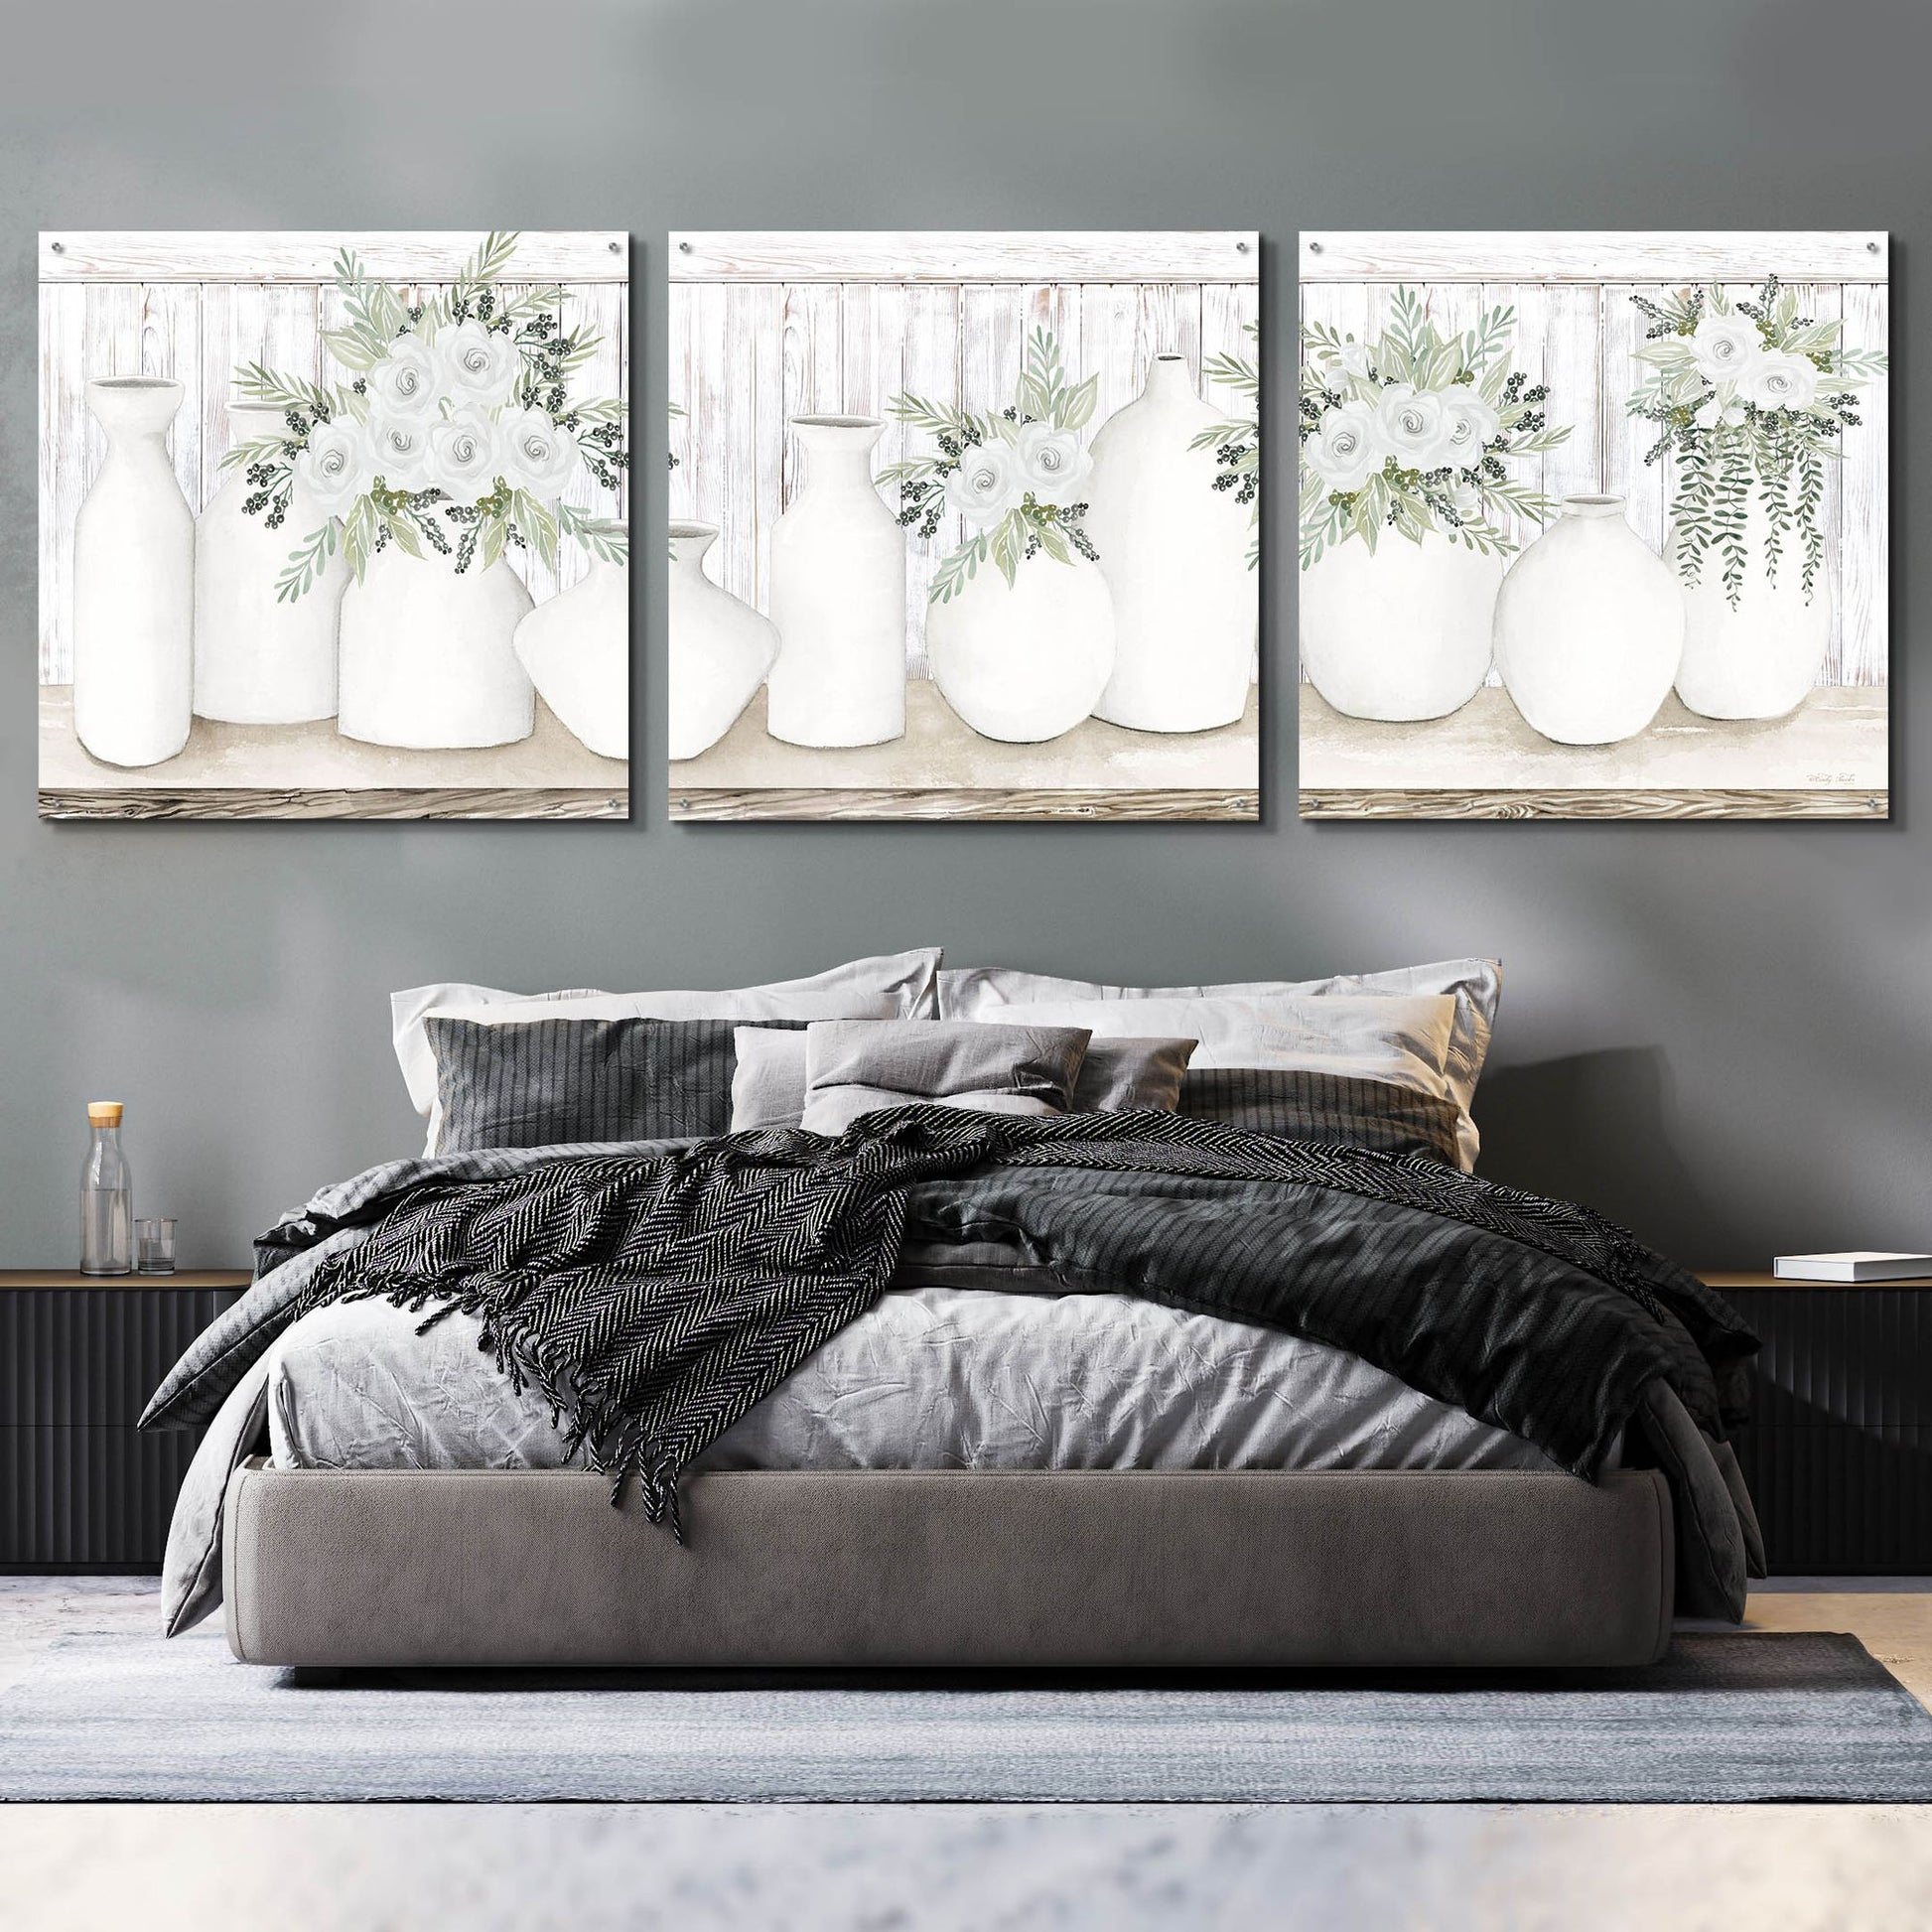 Epic Art 'White Simplicity' by Cindy Jacobs, Acrylic Glass Wall Art, 3 Piece Set,108x36